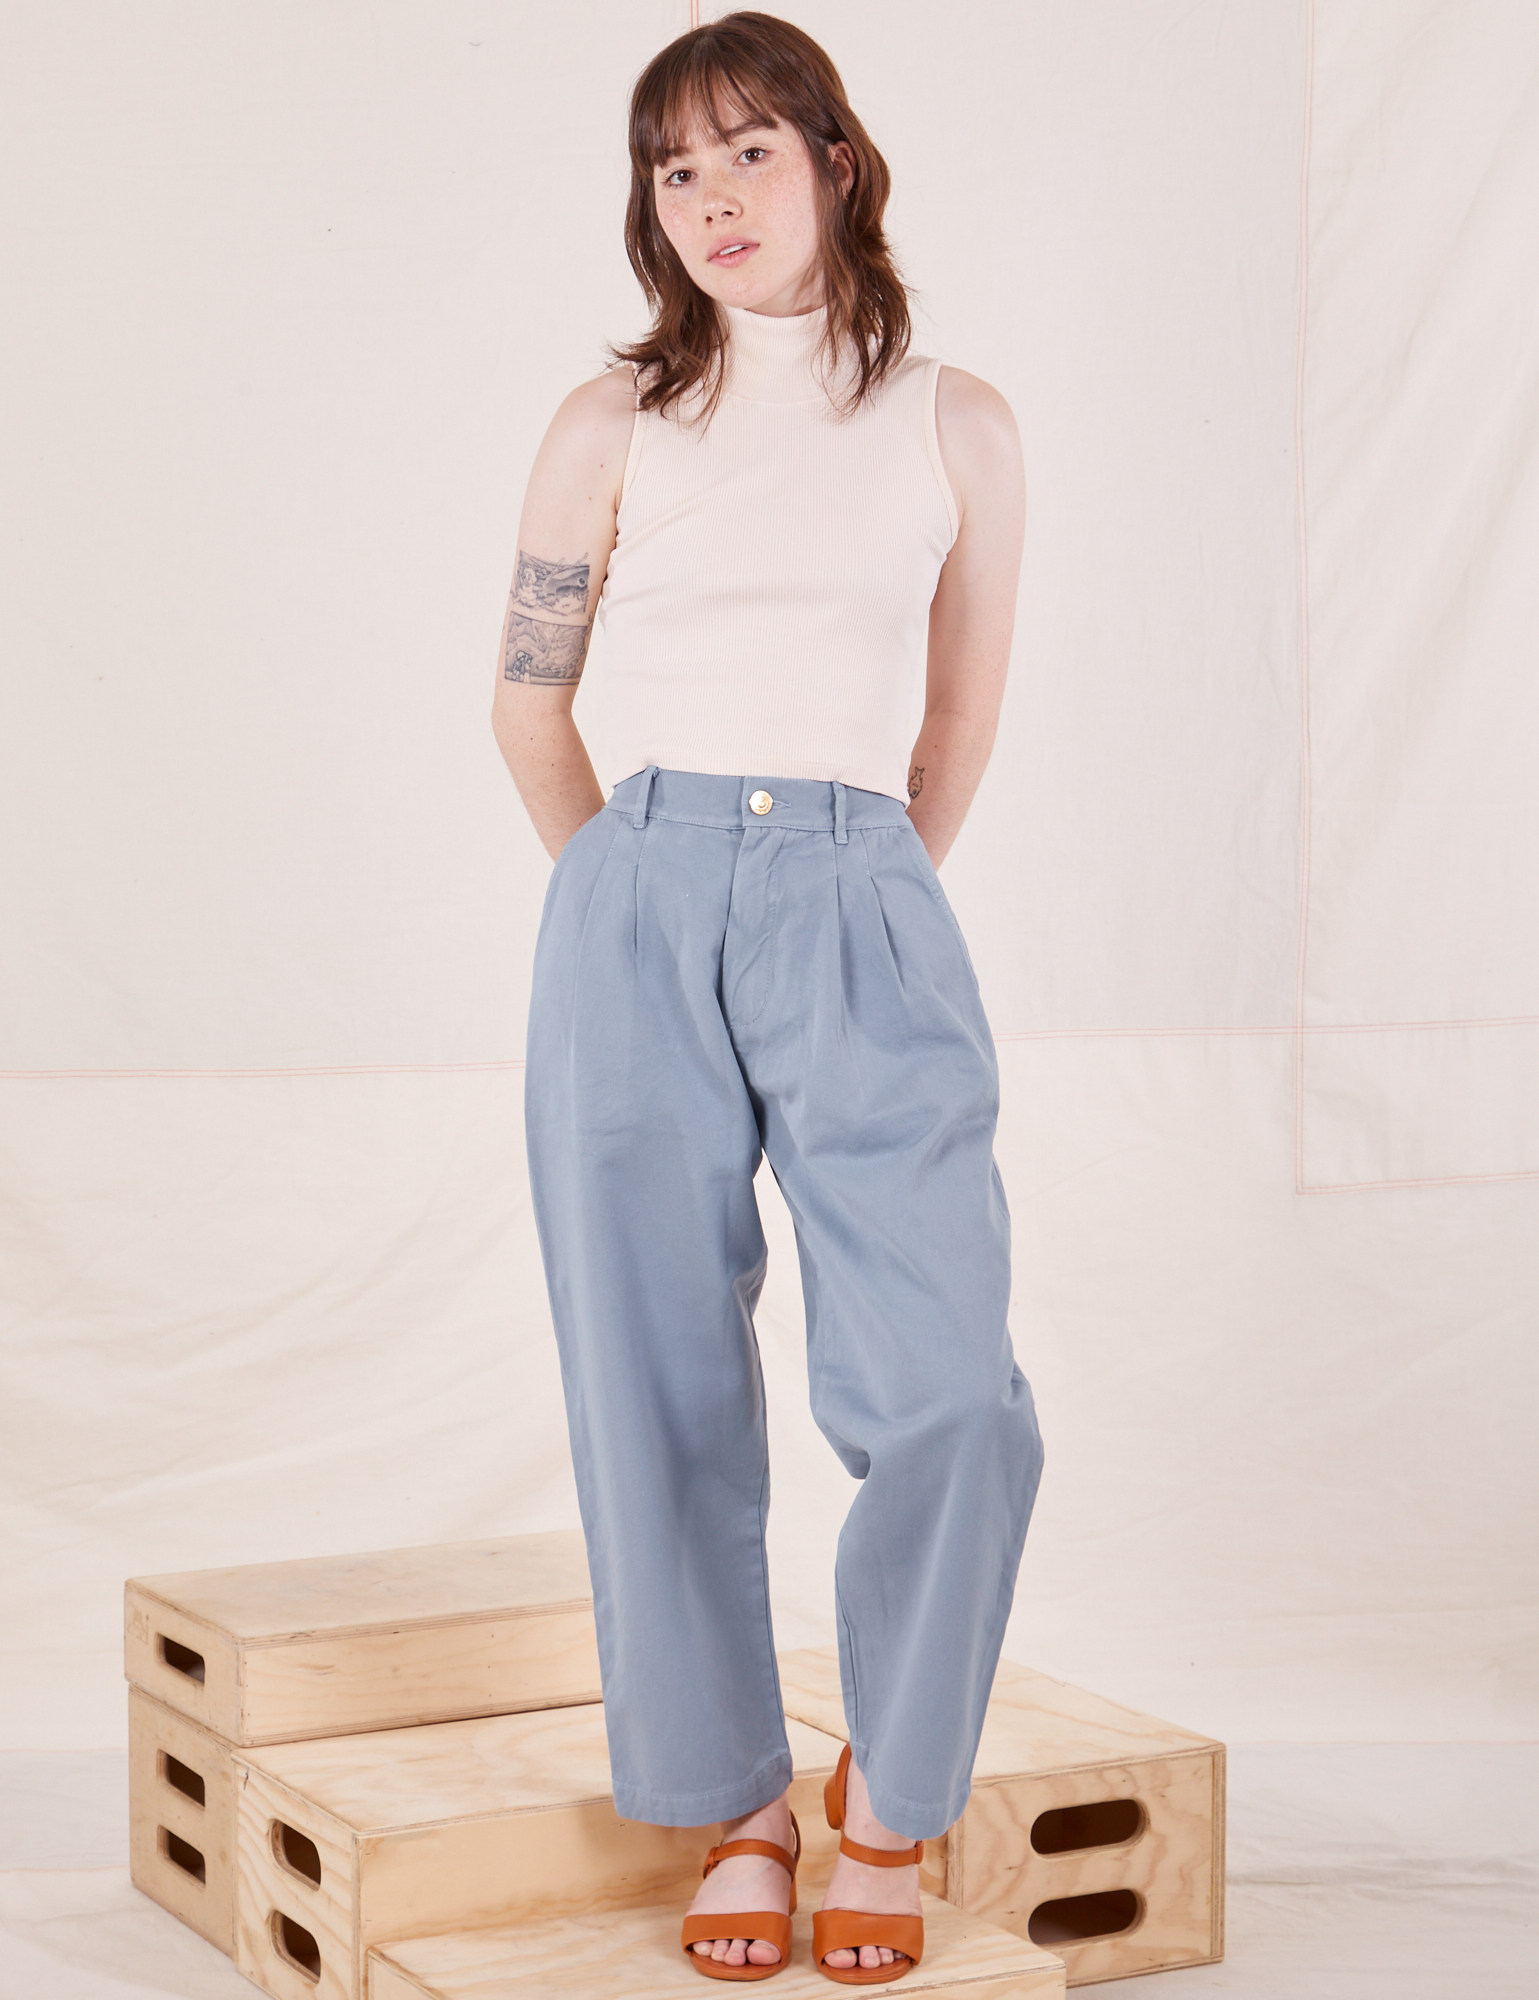 Hana is 5&#39;3&quot; and wearing XXS Petite Organic Trousers in Periwinkle paired with vintage off-white Sleeveless Essential Turtleneck